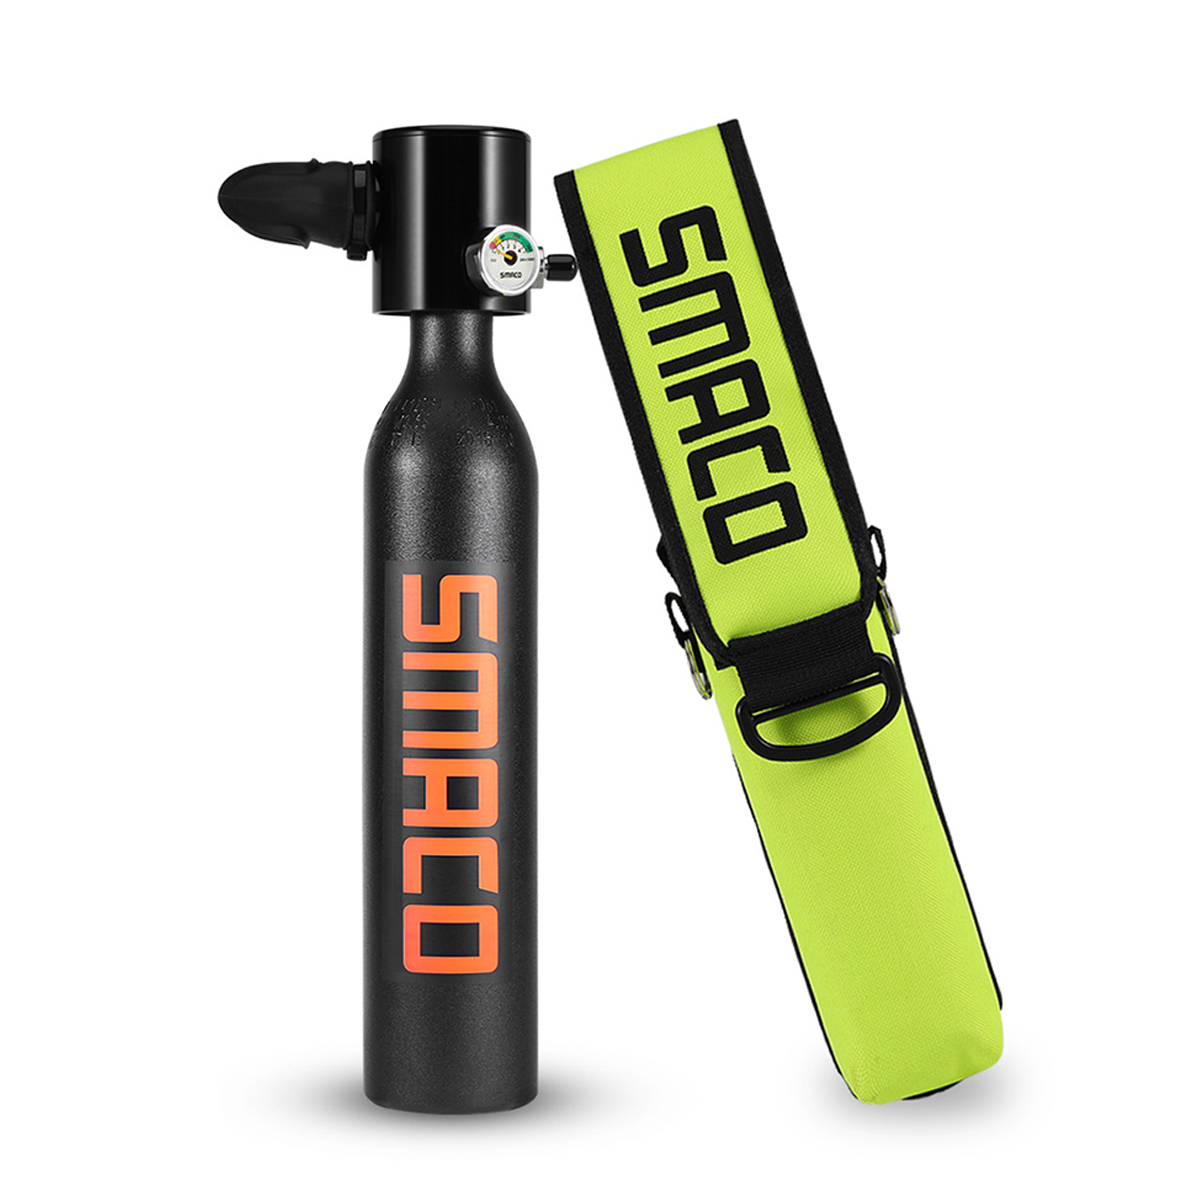 SMACO-4-IN-1-Mini-Scuba-Diving-Cylinder-Oxygen-Air-Tank-Diving-Equipment-w-Hand-Pump-Valve-1534936